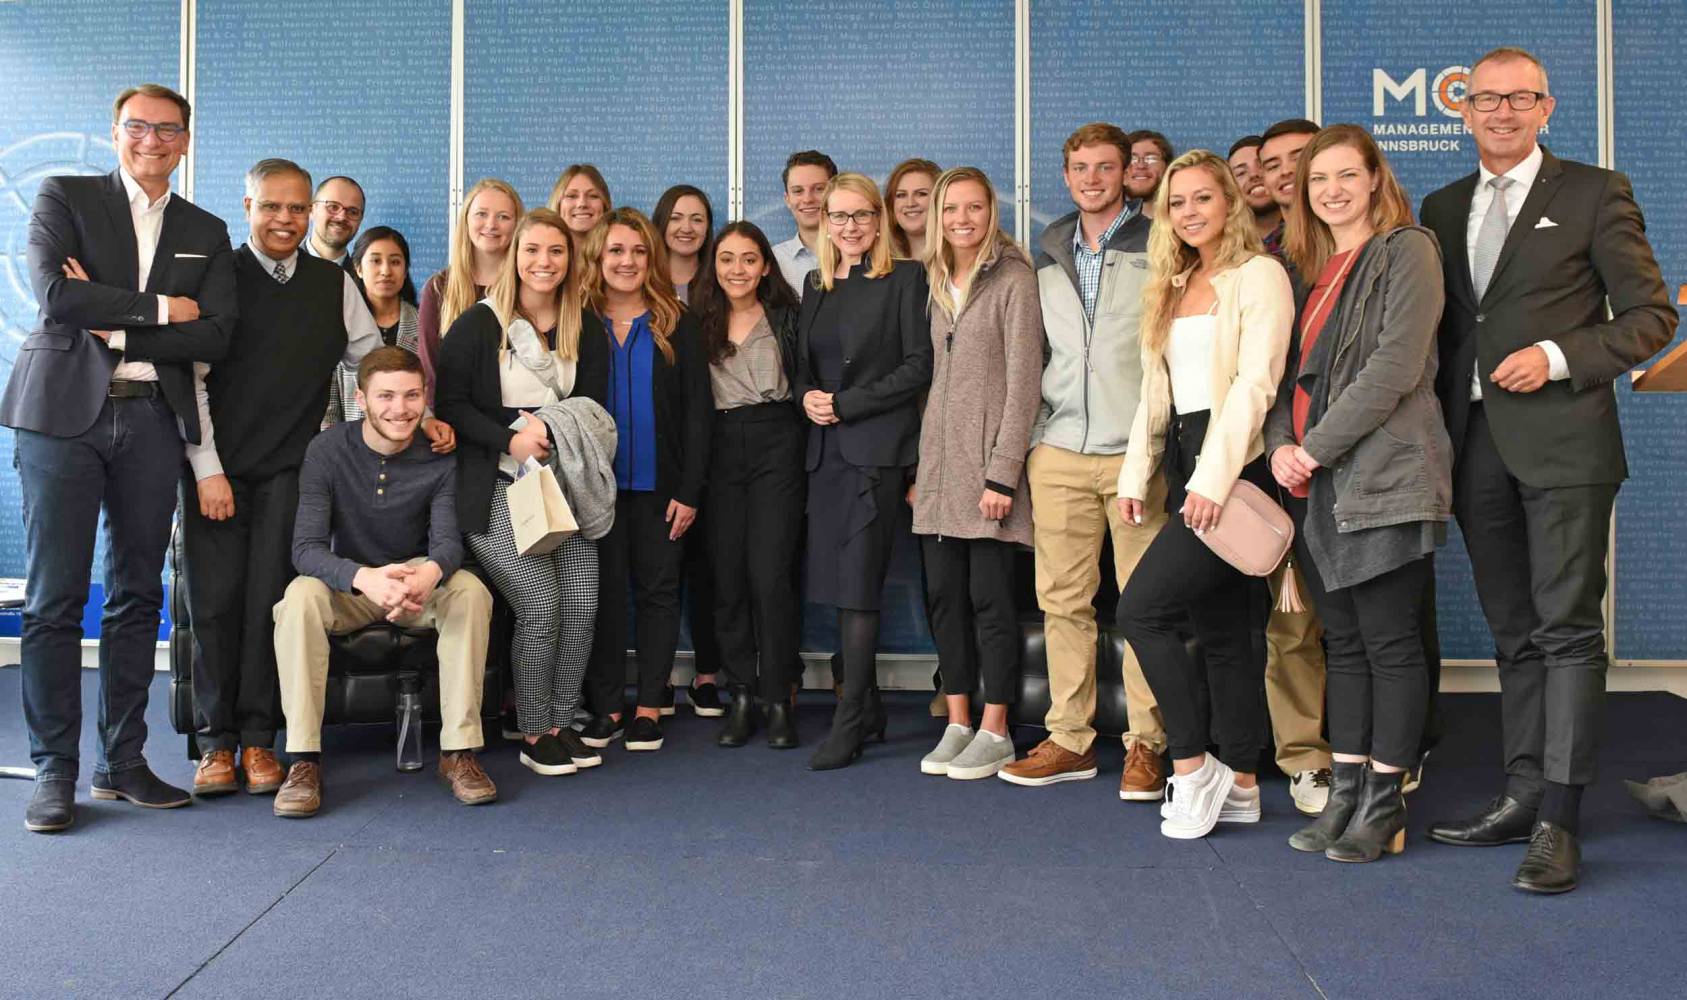 Federal Minister Margarete Schramböck with students from the University of Nebraska at Omaha.